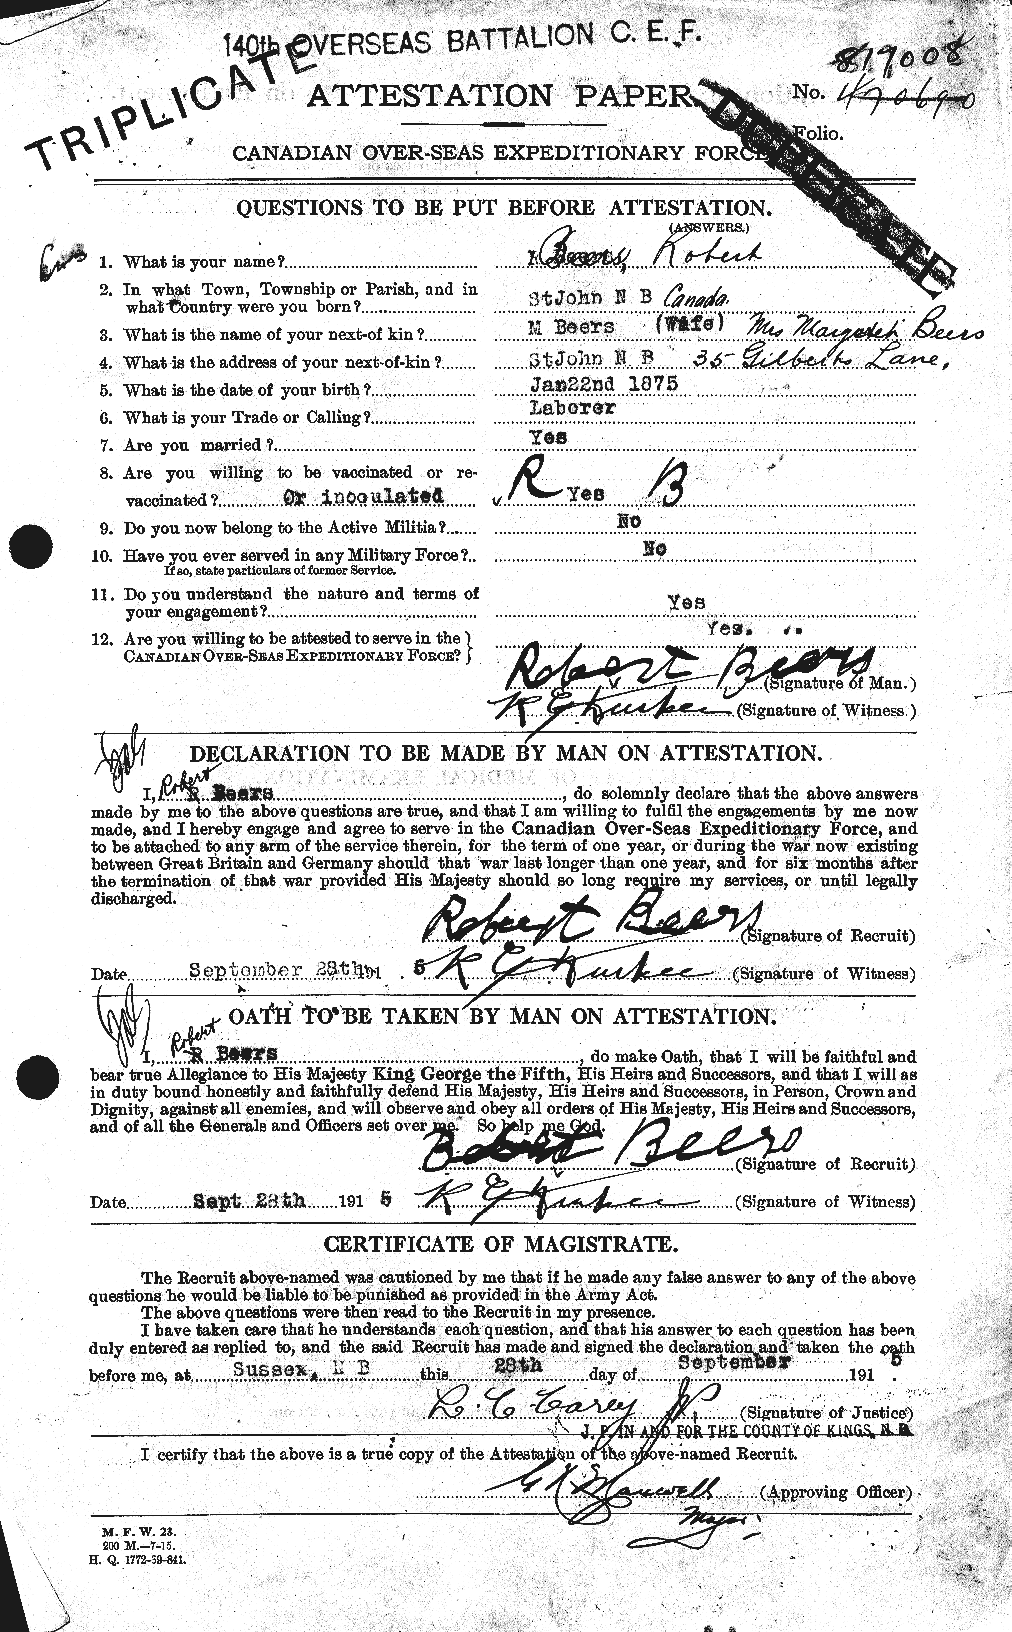 Personnel Records of the First World War - CEF 241610a